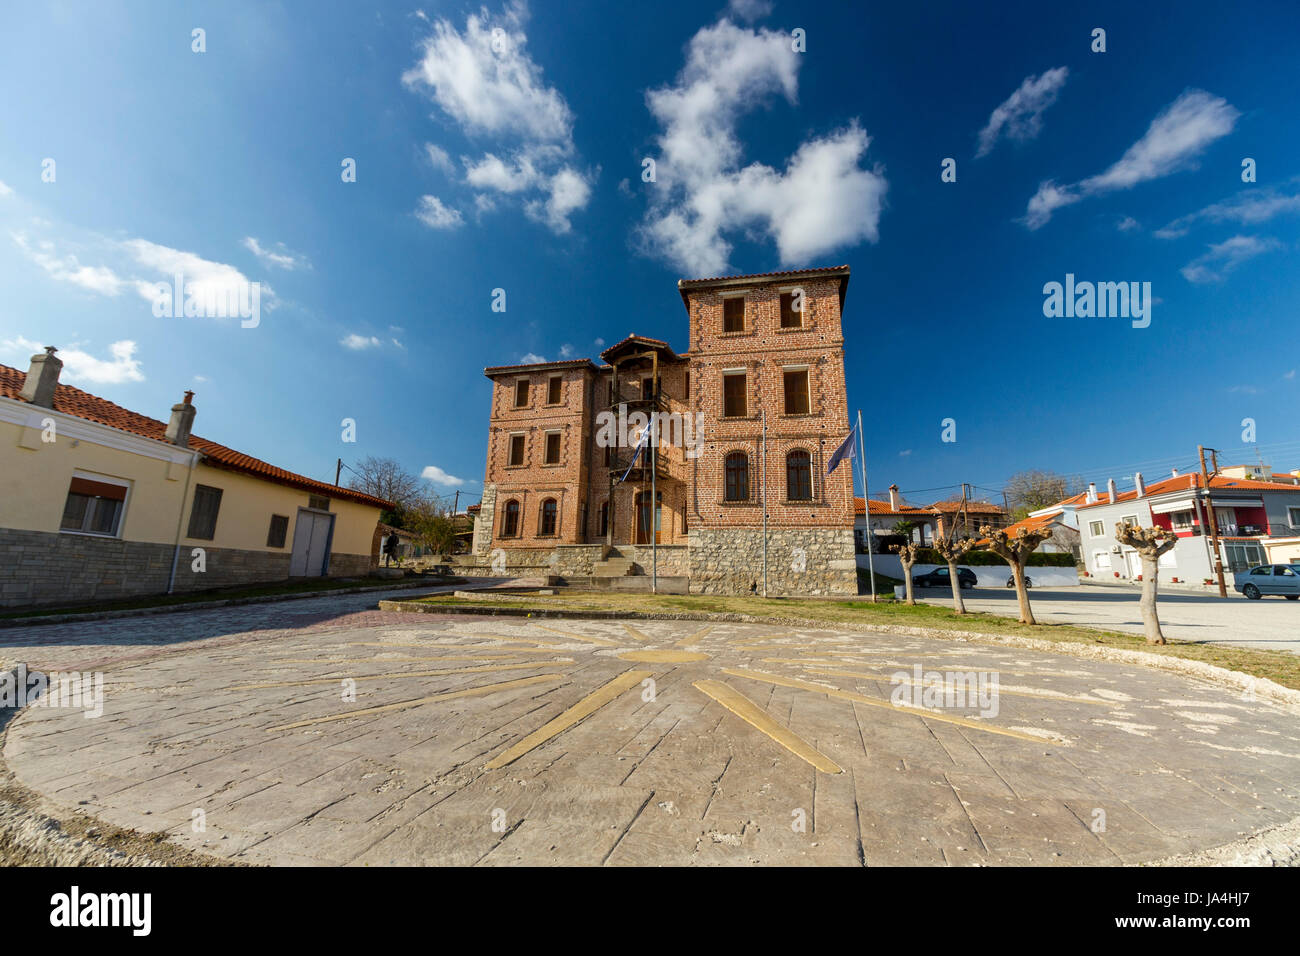 An old and out-of-use silk factory in Soufli, Evros region, Thrace, Greece. Stock Photo